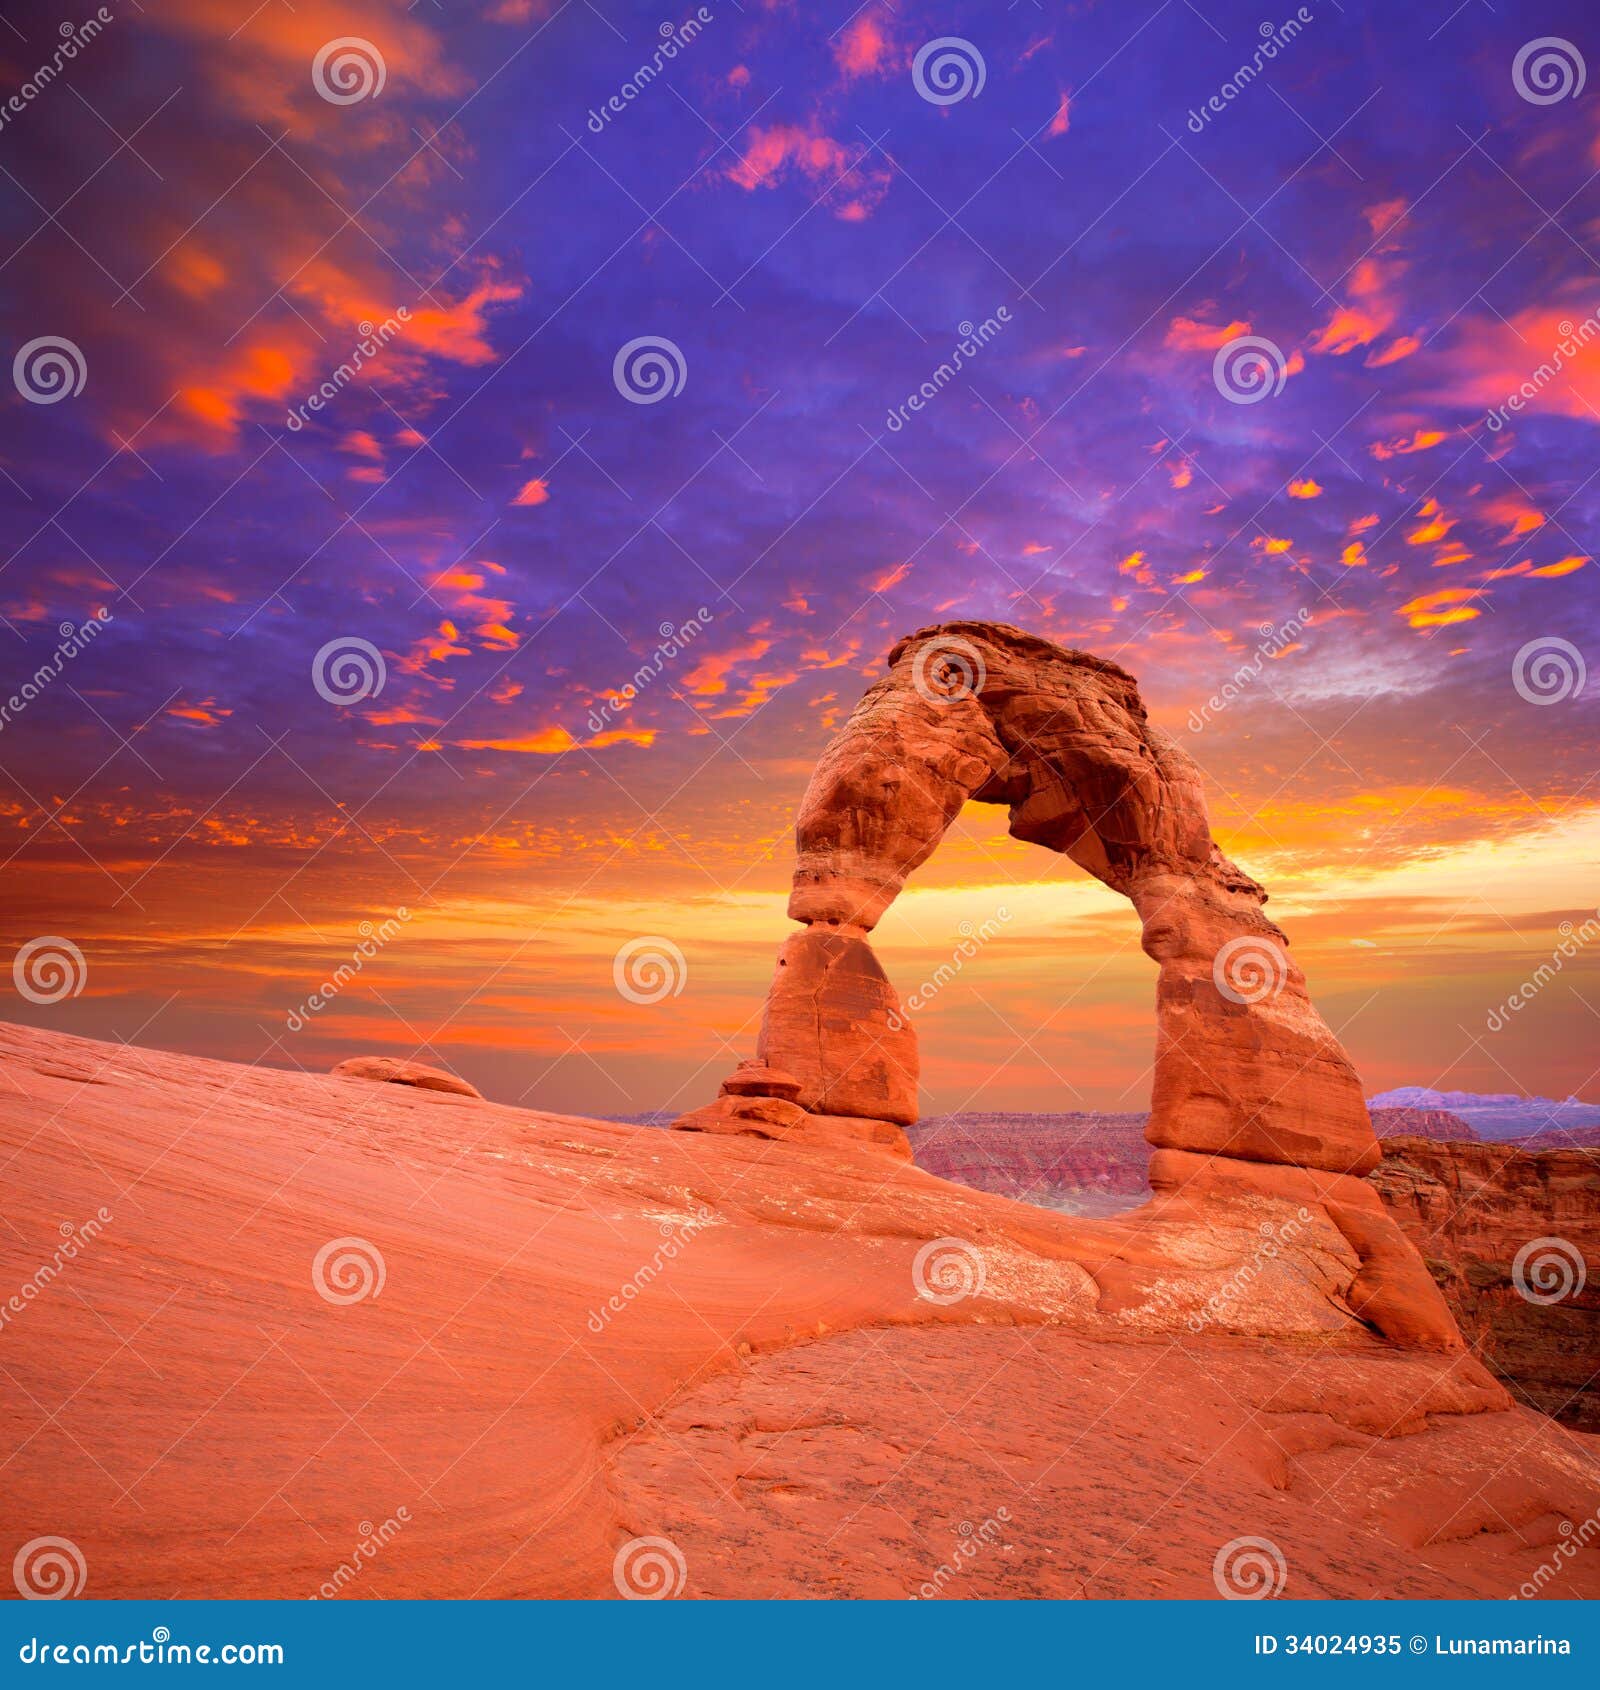 arches national park delicate arch in utah usa